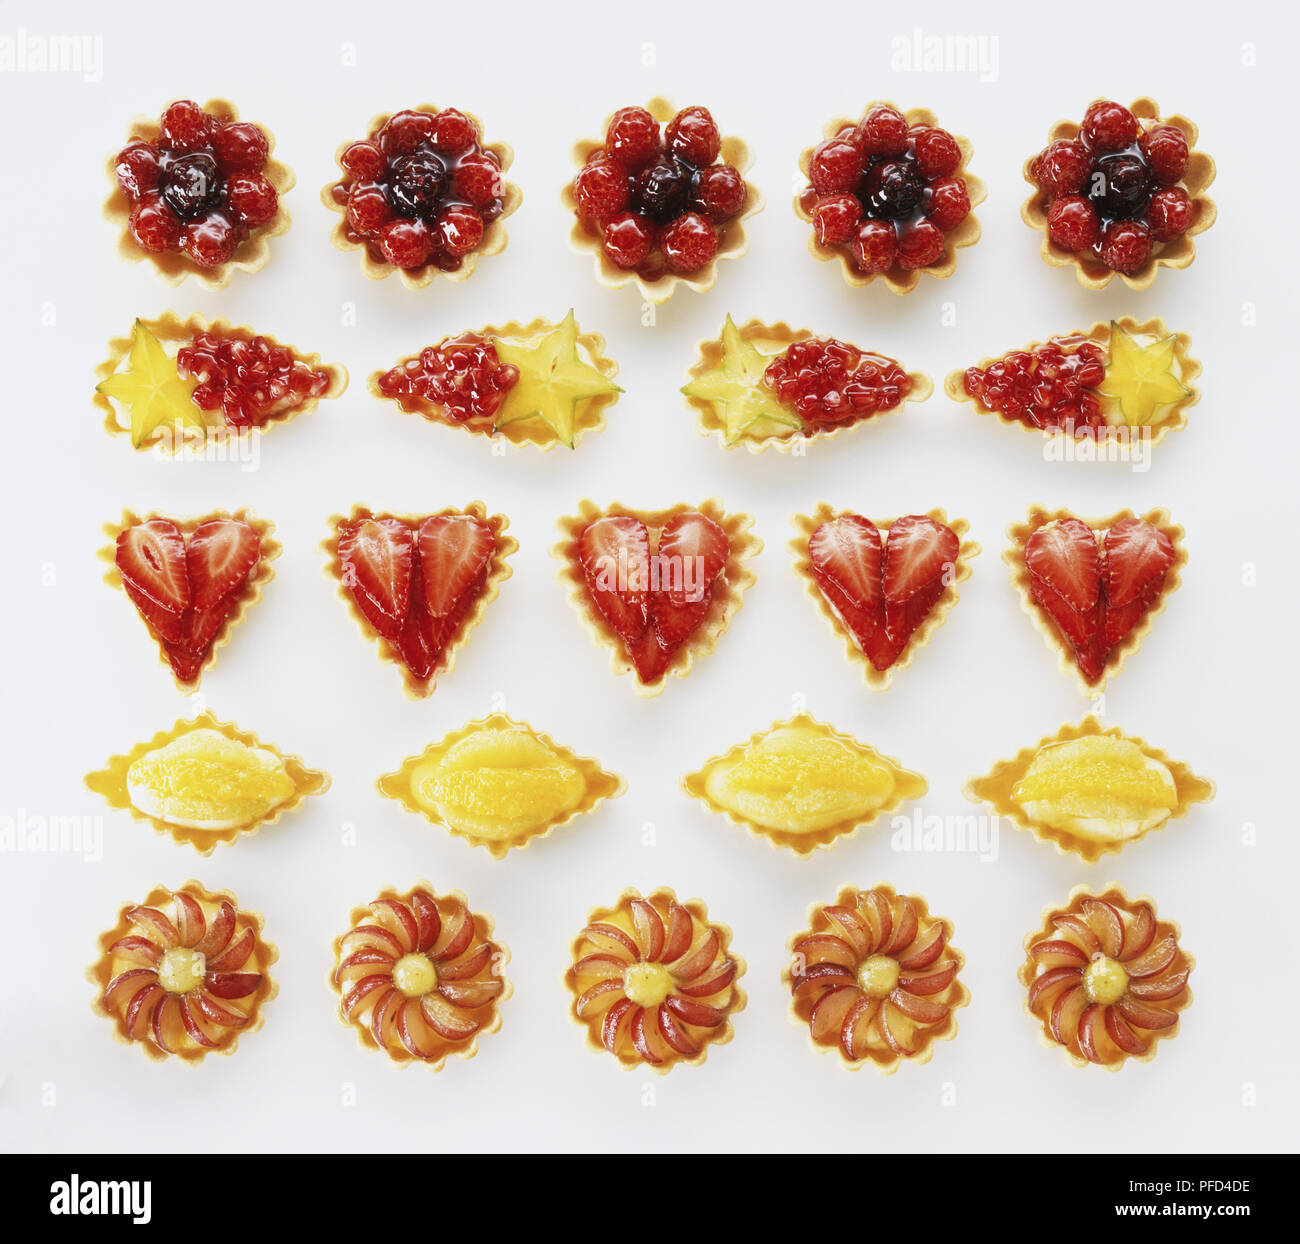 Selection of glazed fruit tartlets, view from above Stock Photo